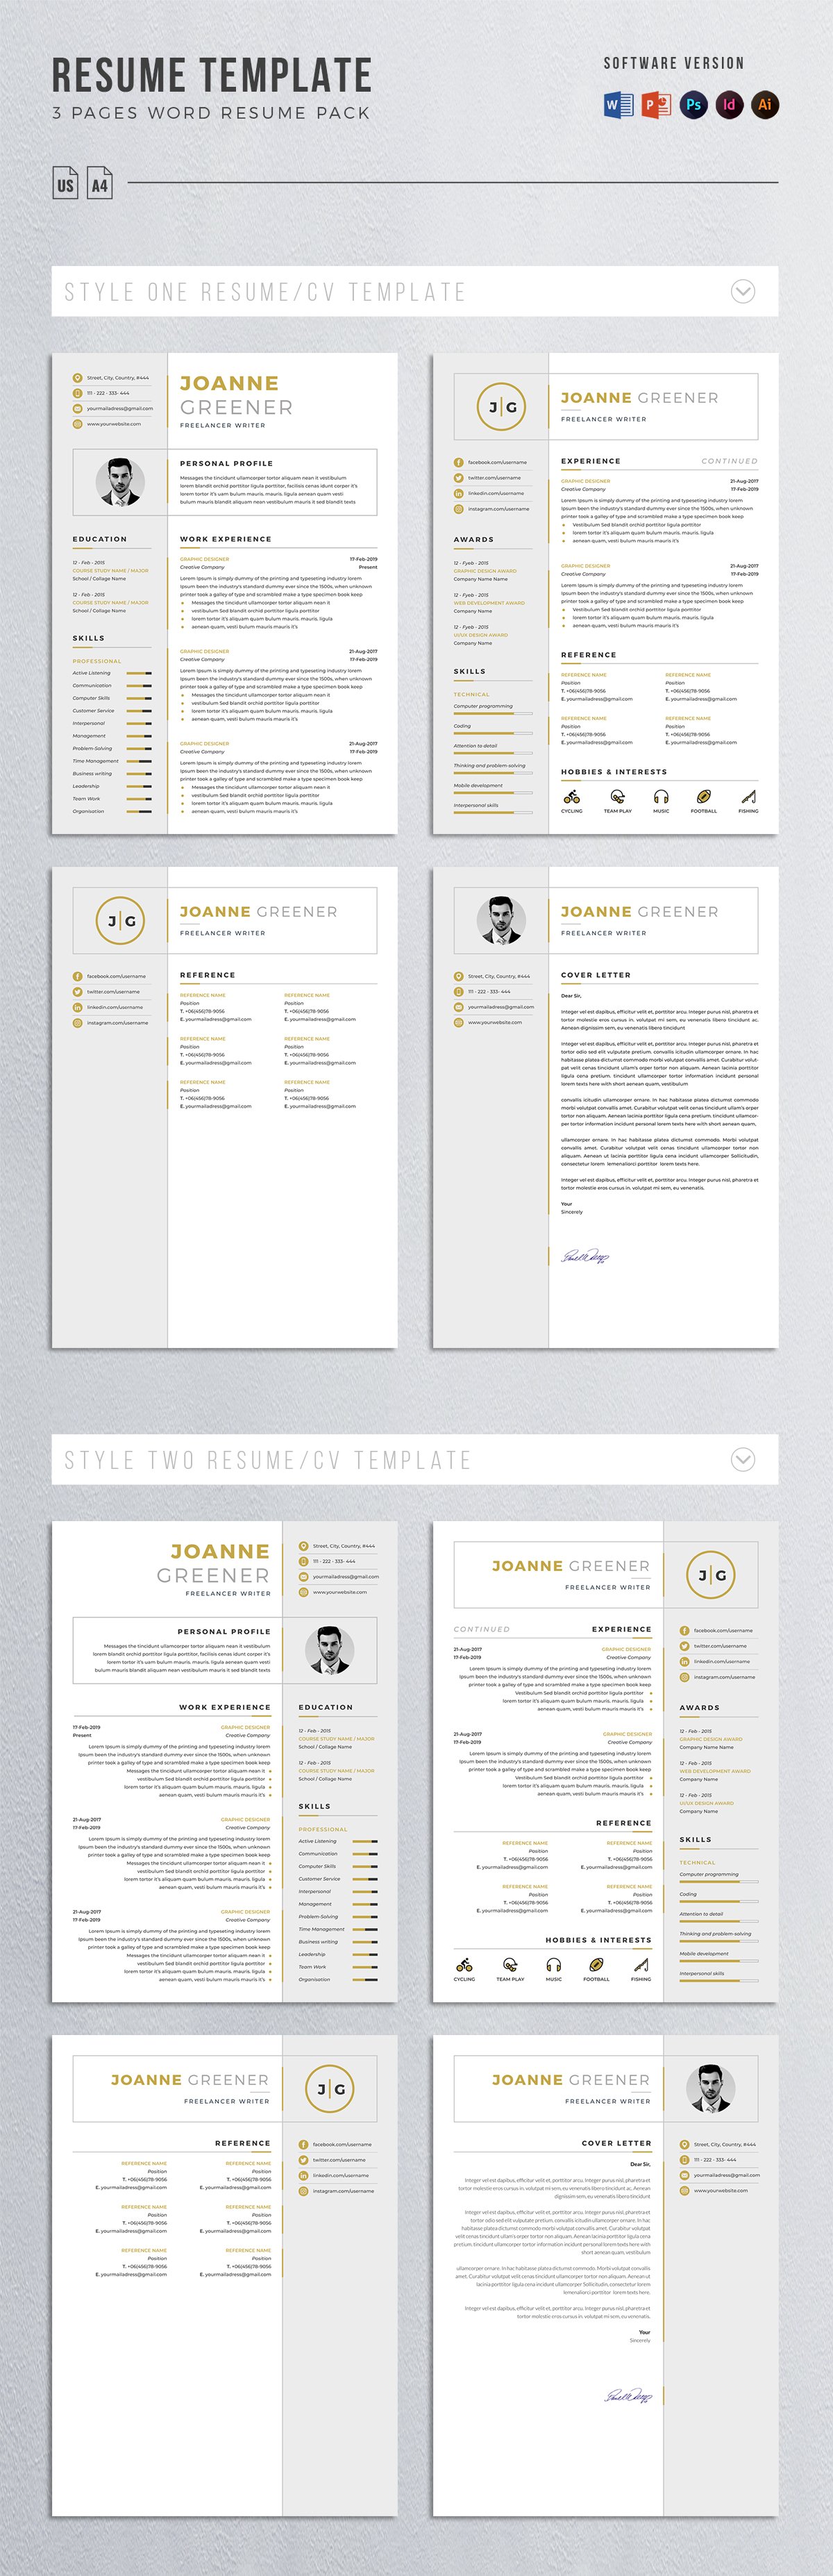 resume template 4 pages pack 543